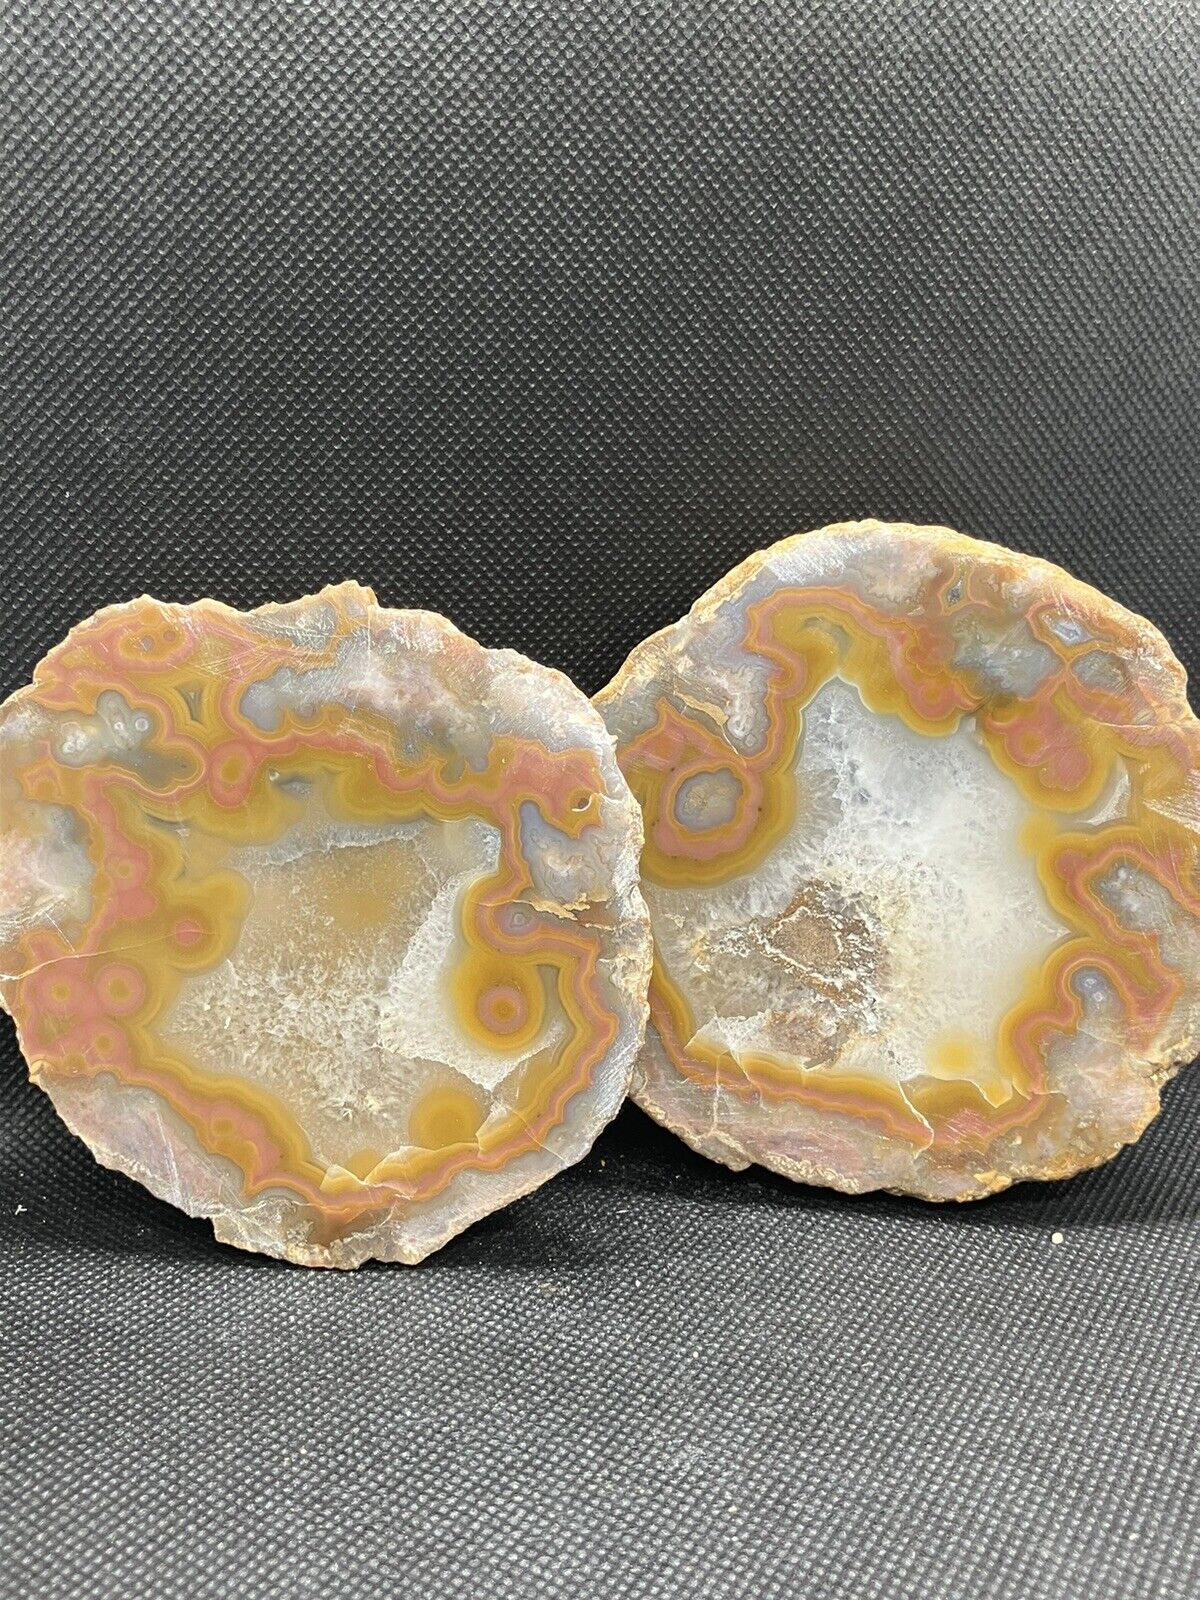 CUT AND POLISHED ESTIL COUNTY KENTUCKY Agate Display Top Quality